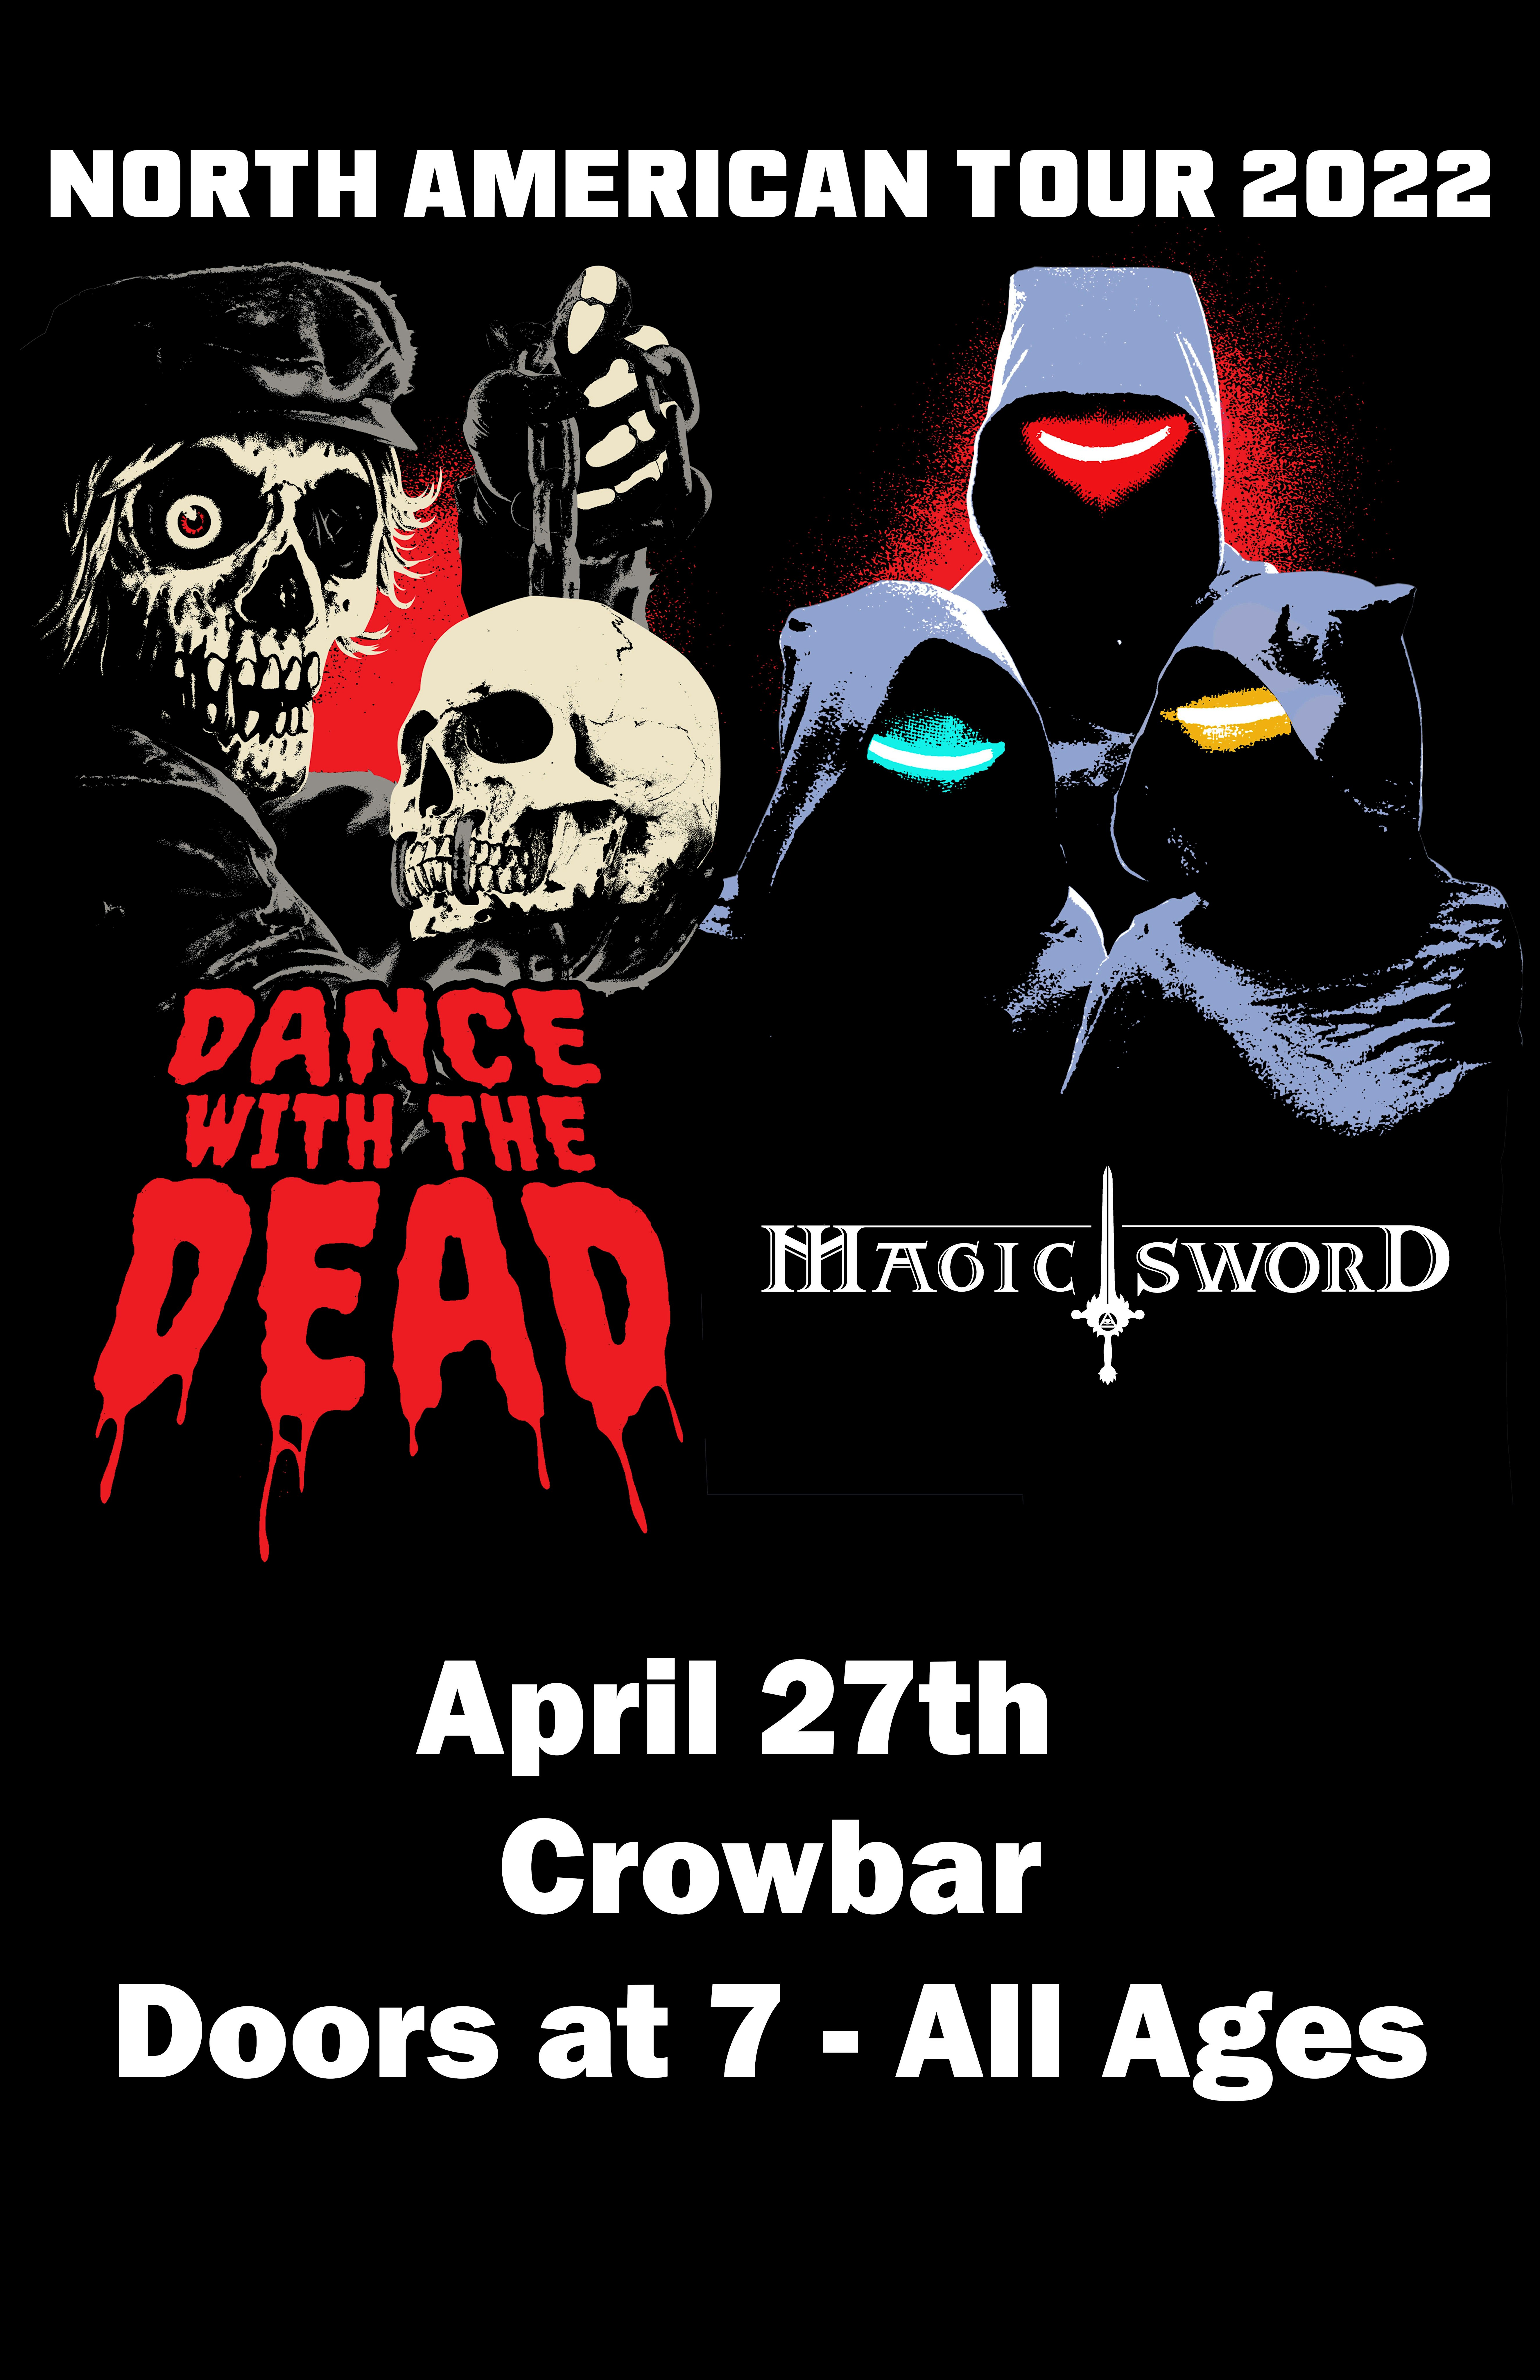 Dance with the Dead, Magic Sword, and More in Tampa at Crowbar